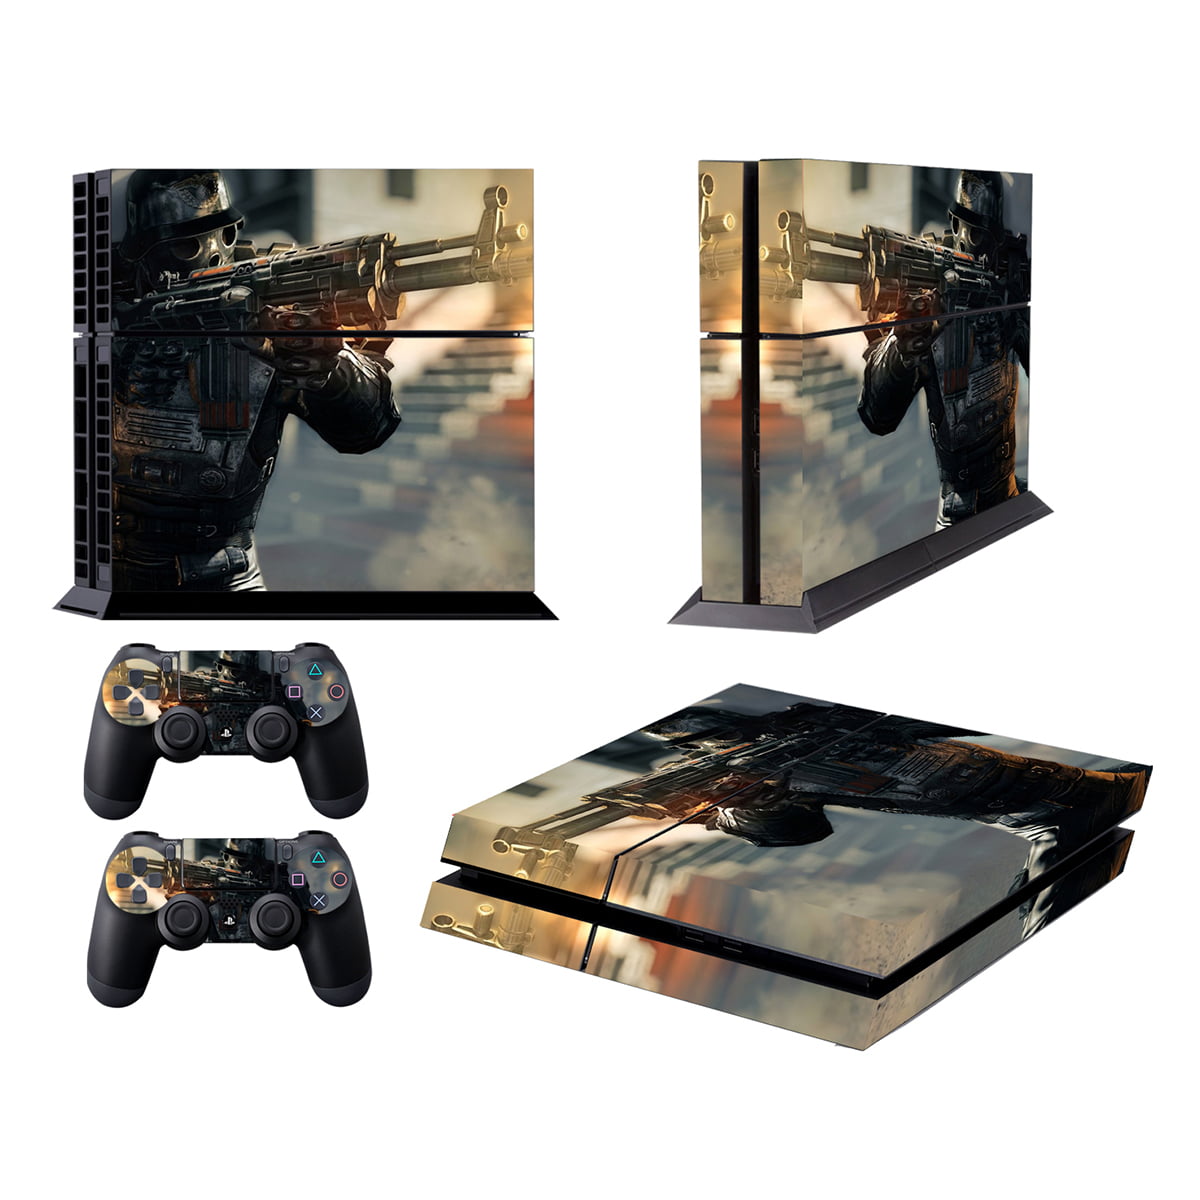 GameXcel Protective Skin Cover for PS4 Console and 2 Dualshock Controllers Vinyl Playstation 4 Decal Sticker vinilo Calcomanía - Blue Fire Walmart.com